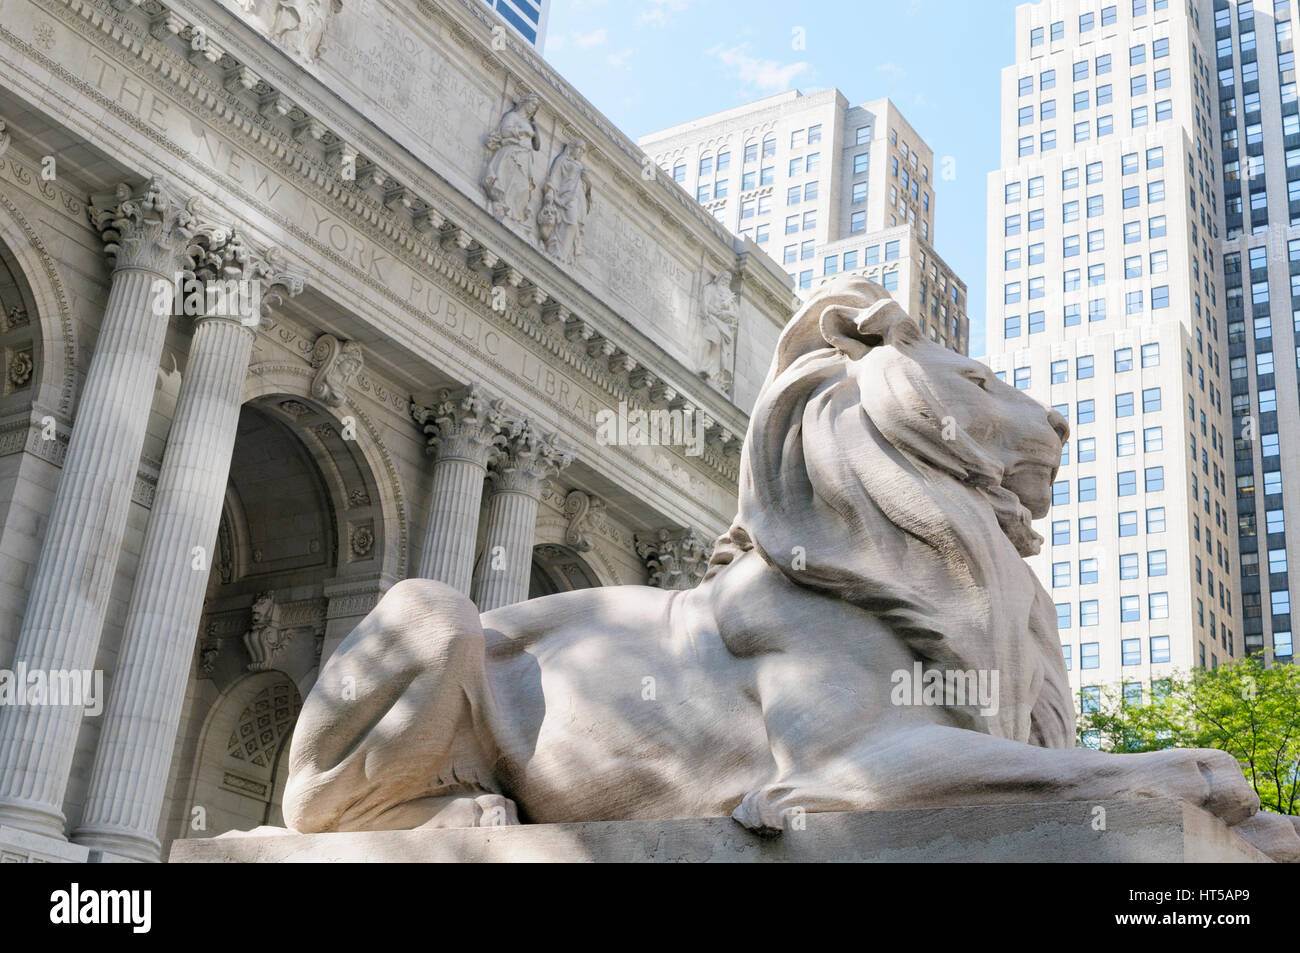 Stone lion outside the Stephen A Schwarzman Building, New York public library, NYC, USA Stock Photo